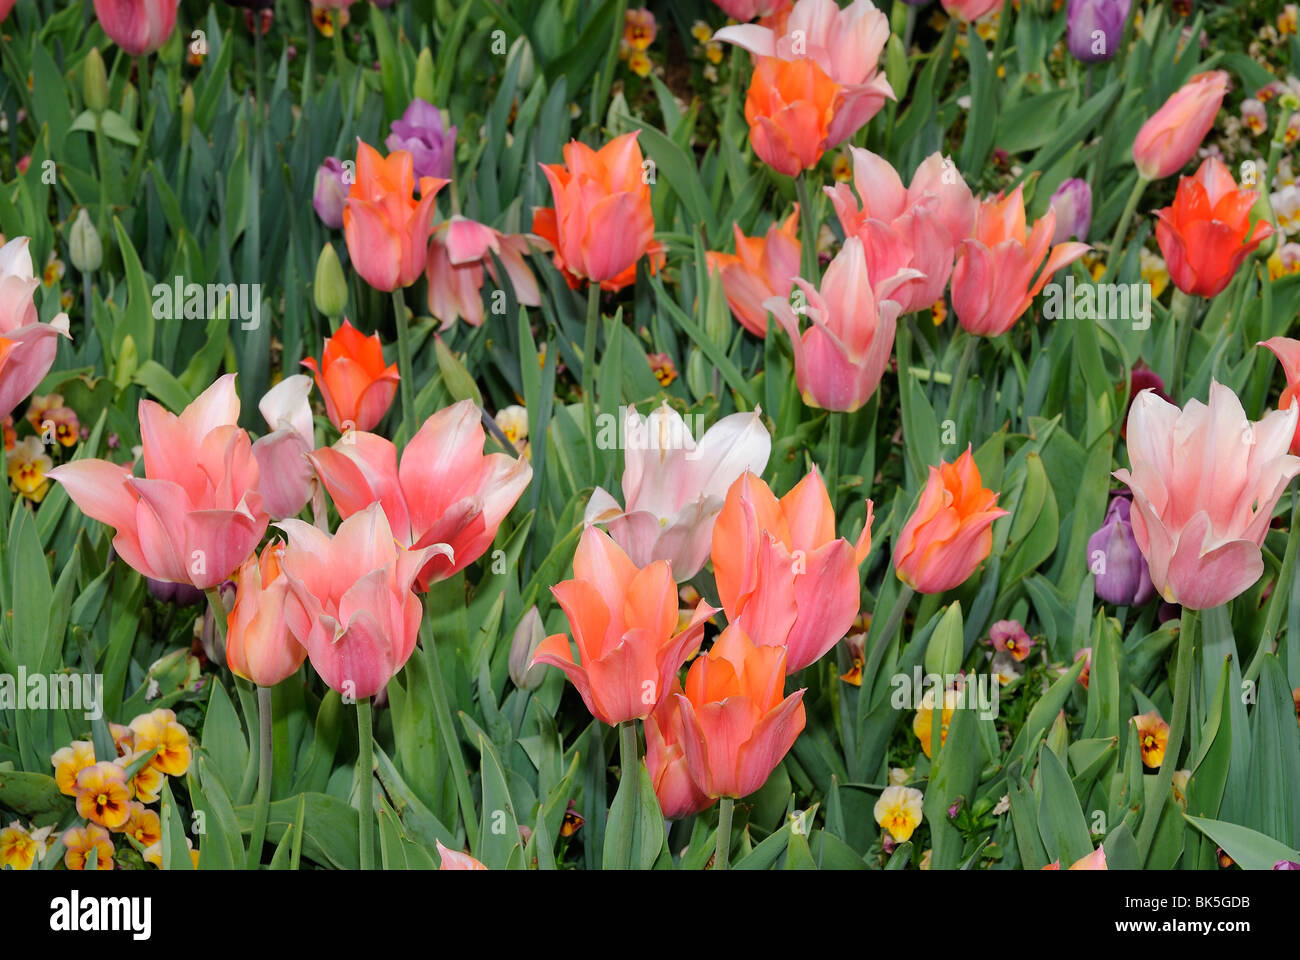 Flower Bed Of Tulips And Pansies Blooming In The Dallas Arboretum